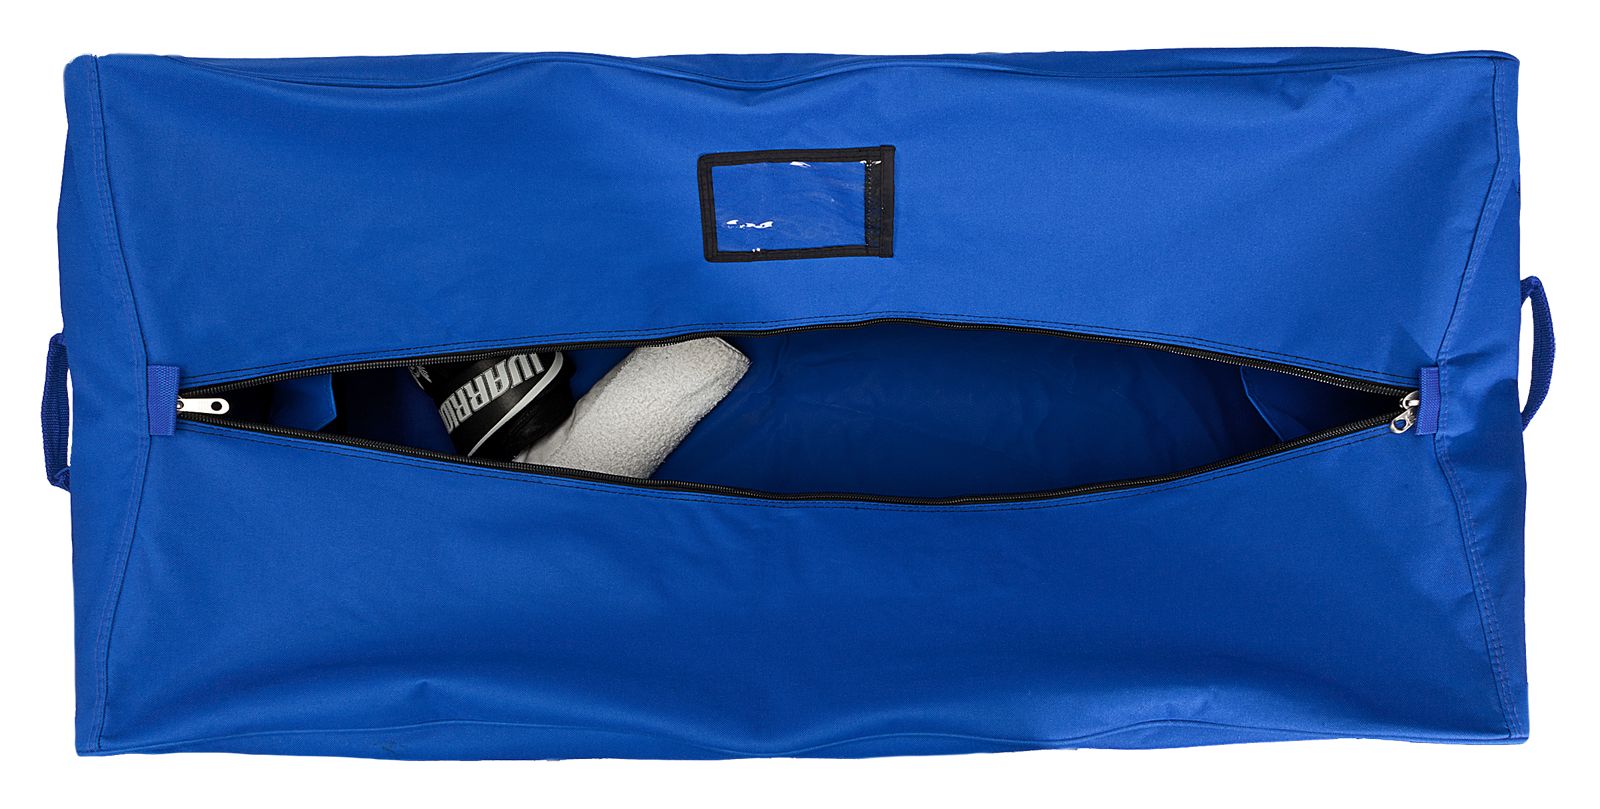 Team Goalie Duffel Bag, Royal Blue with White image number 4